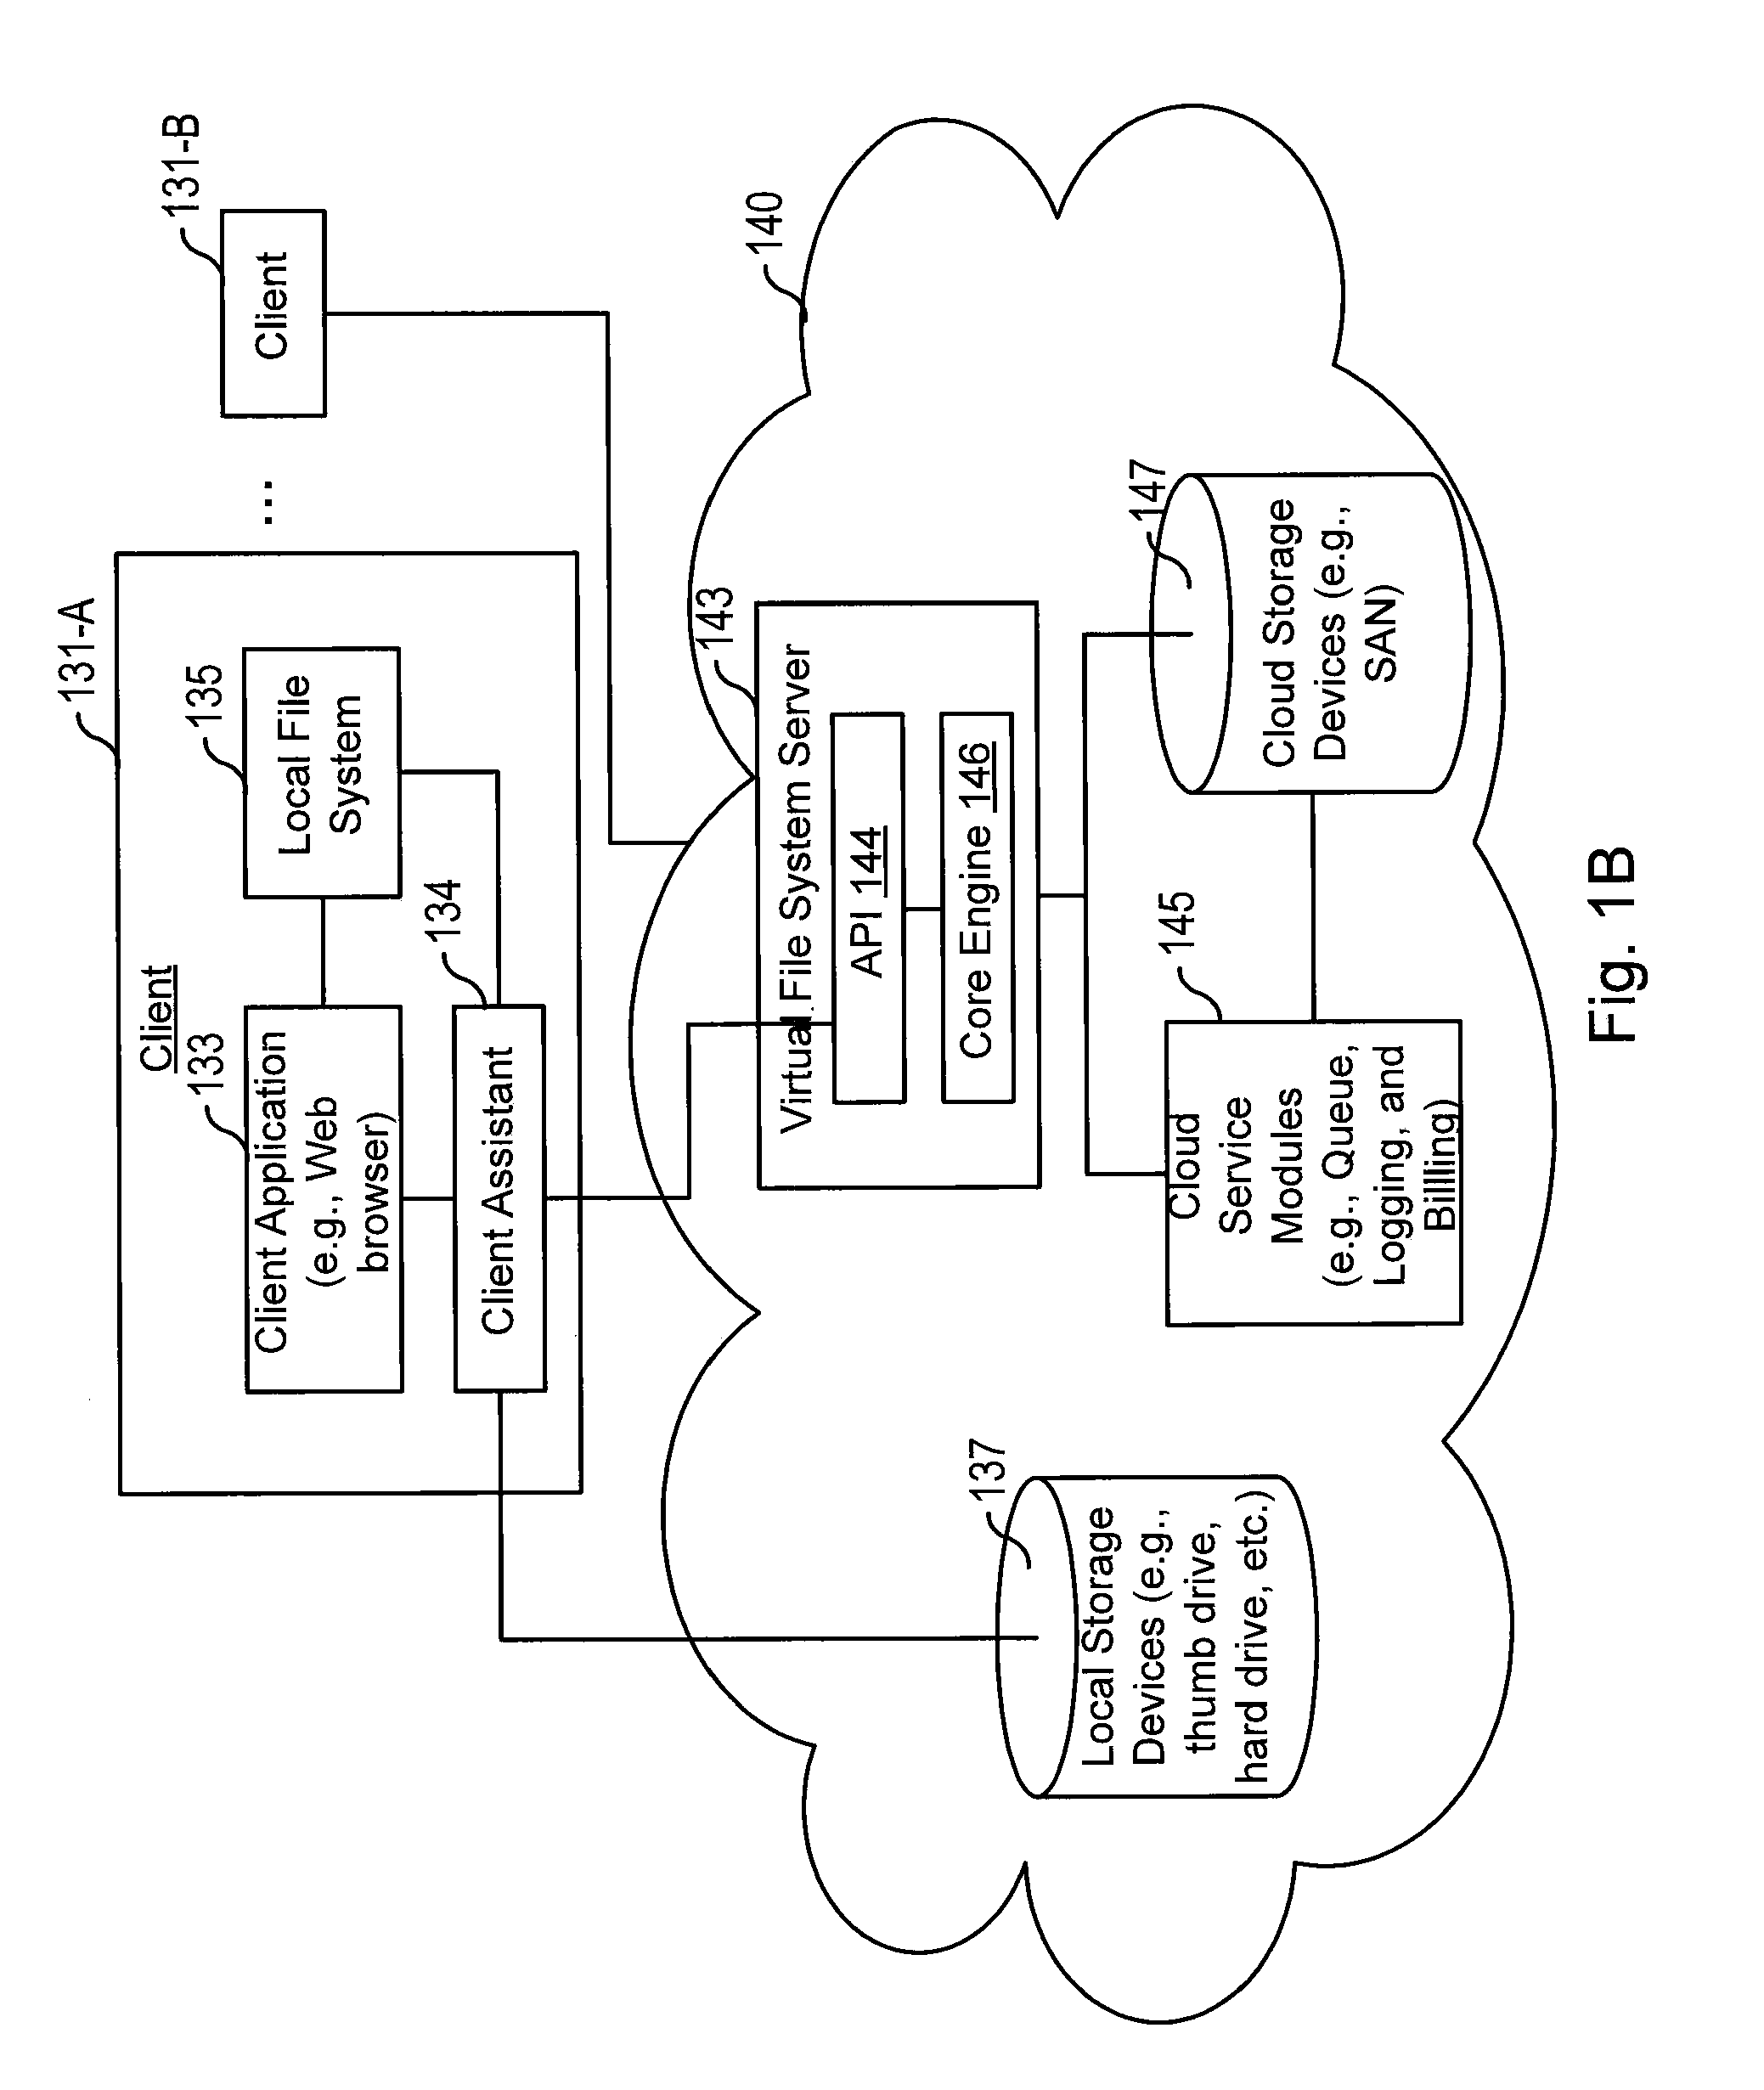 Method and System for Resolving Conflicts Between Revisions to a Distributed Virtual File System